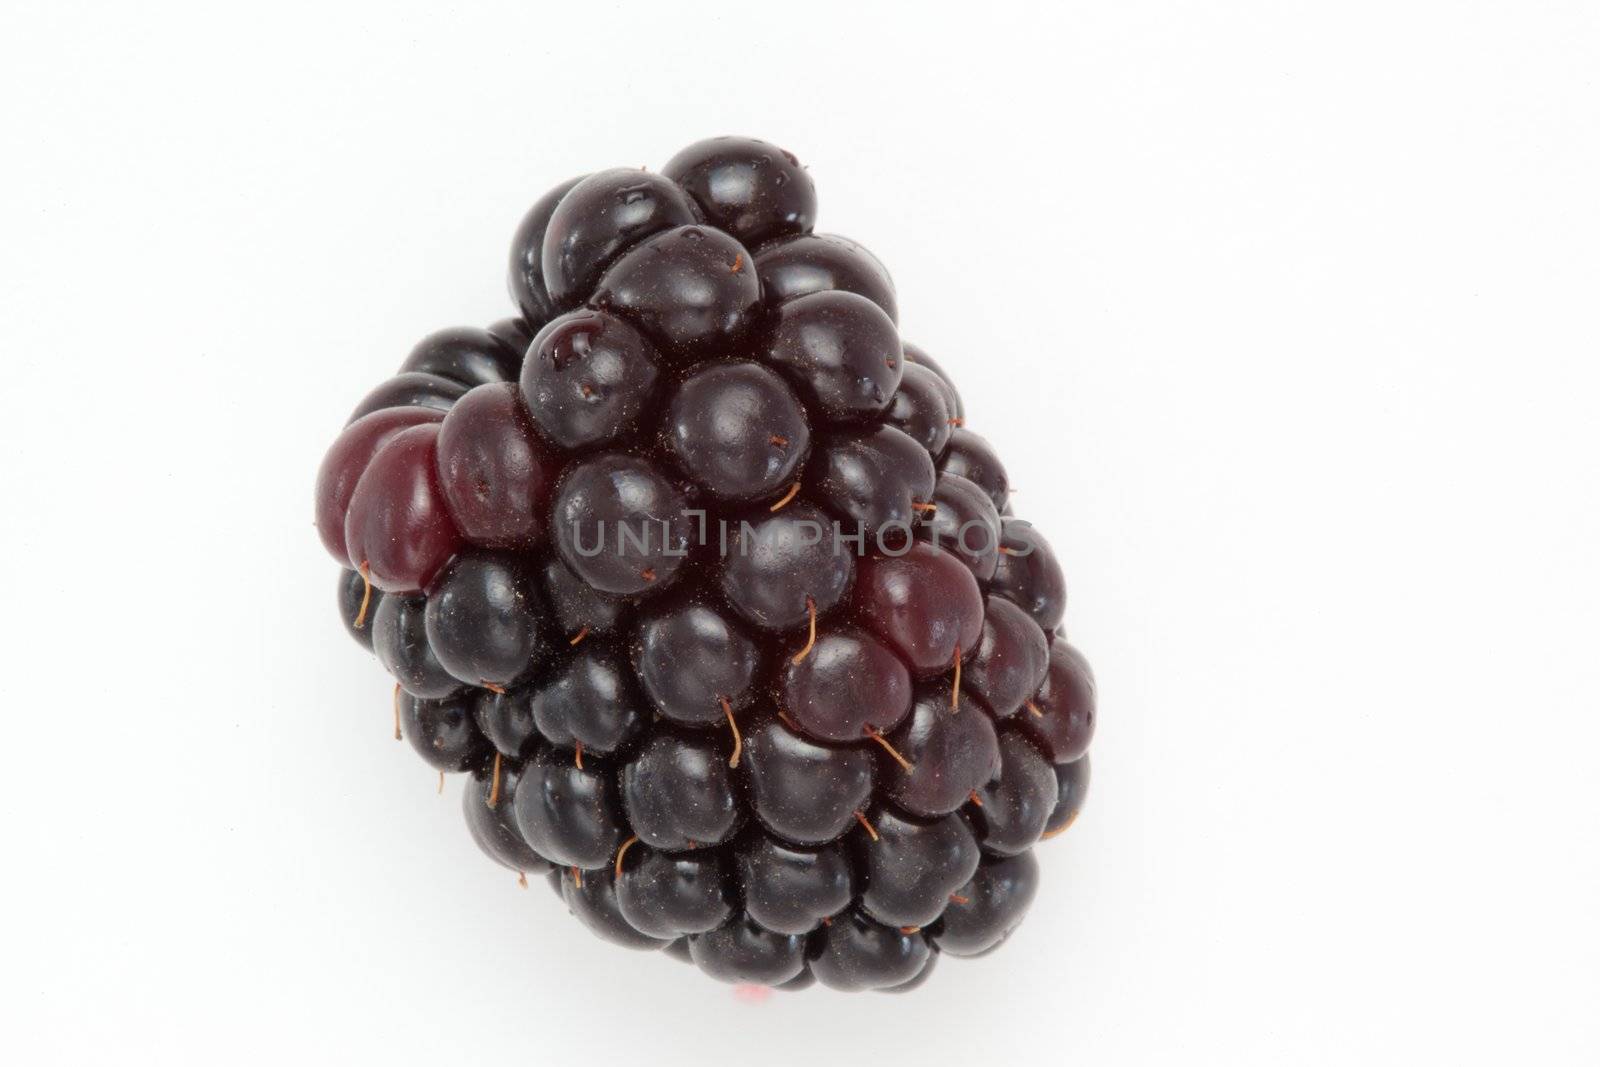 Blackberry  against a white background